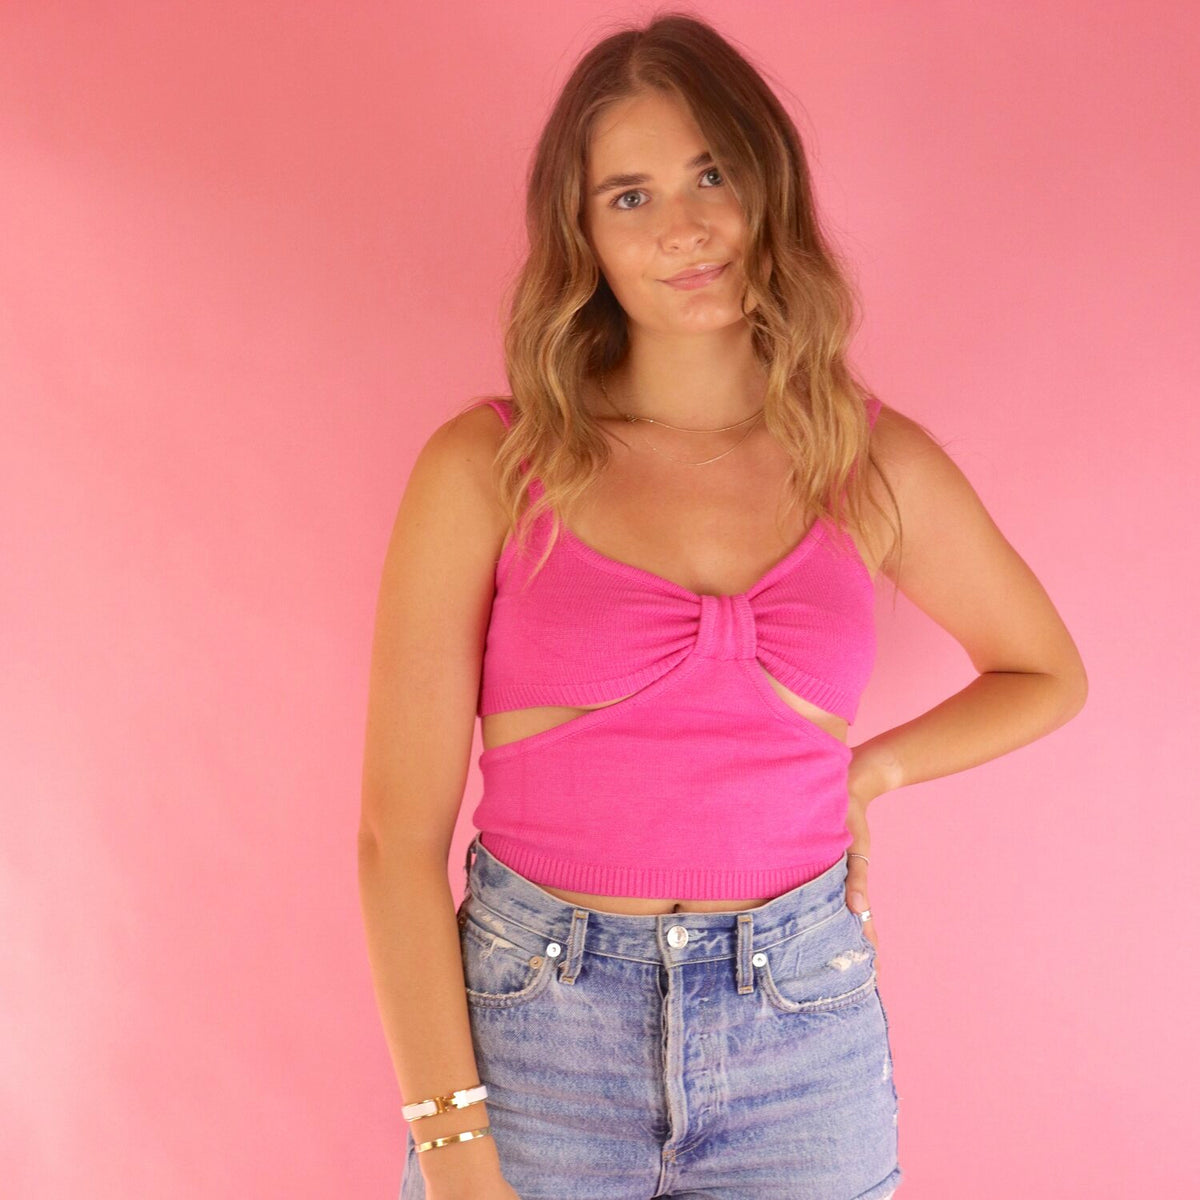 In Your Shoes Pink Cutout Top